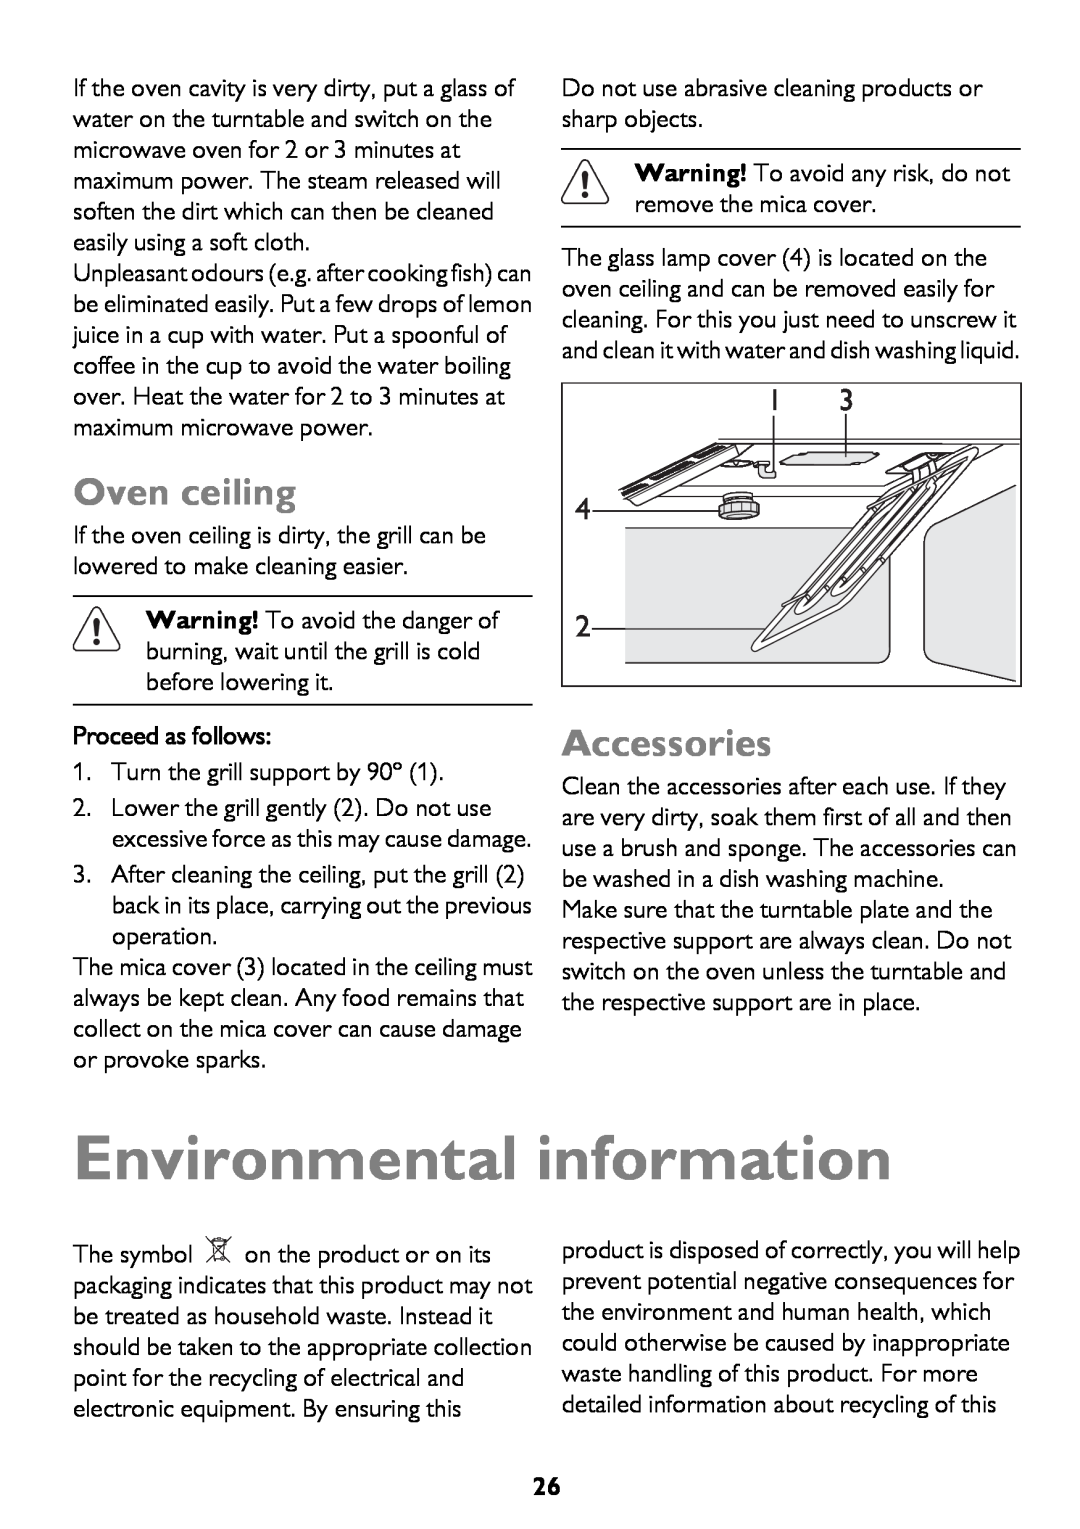 John Lewis JLBICO2 instruction manual Environmental information, Oven ceiling, Accessories, Proceed as follows 